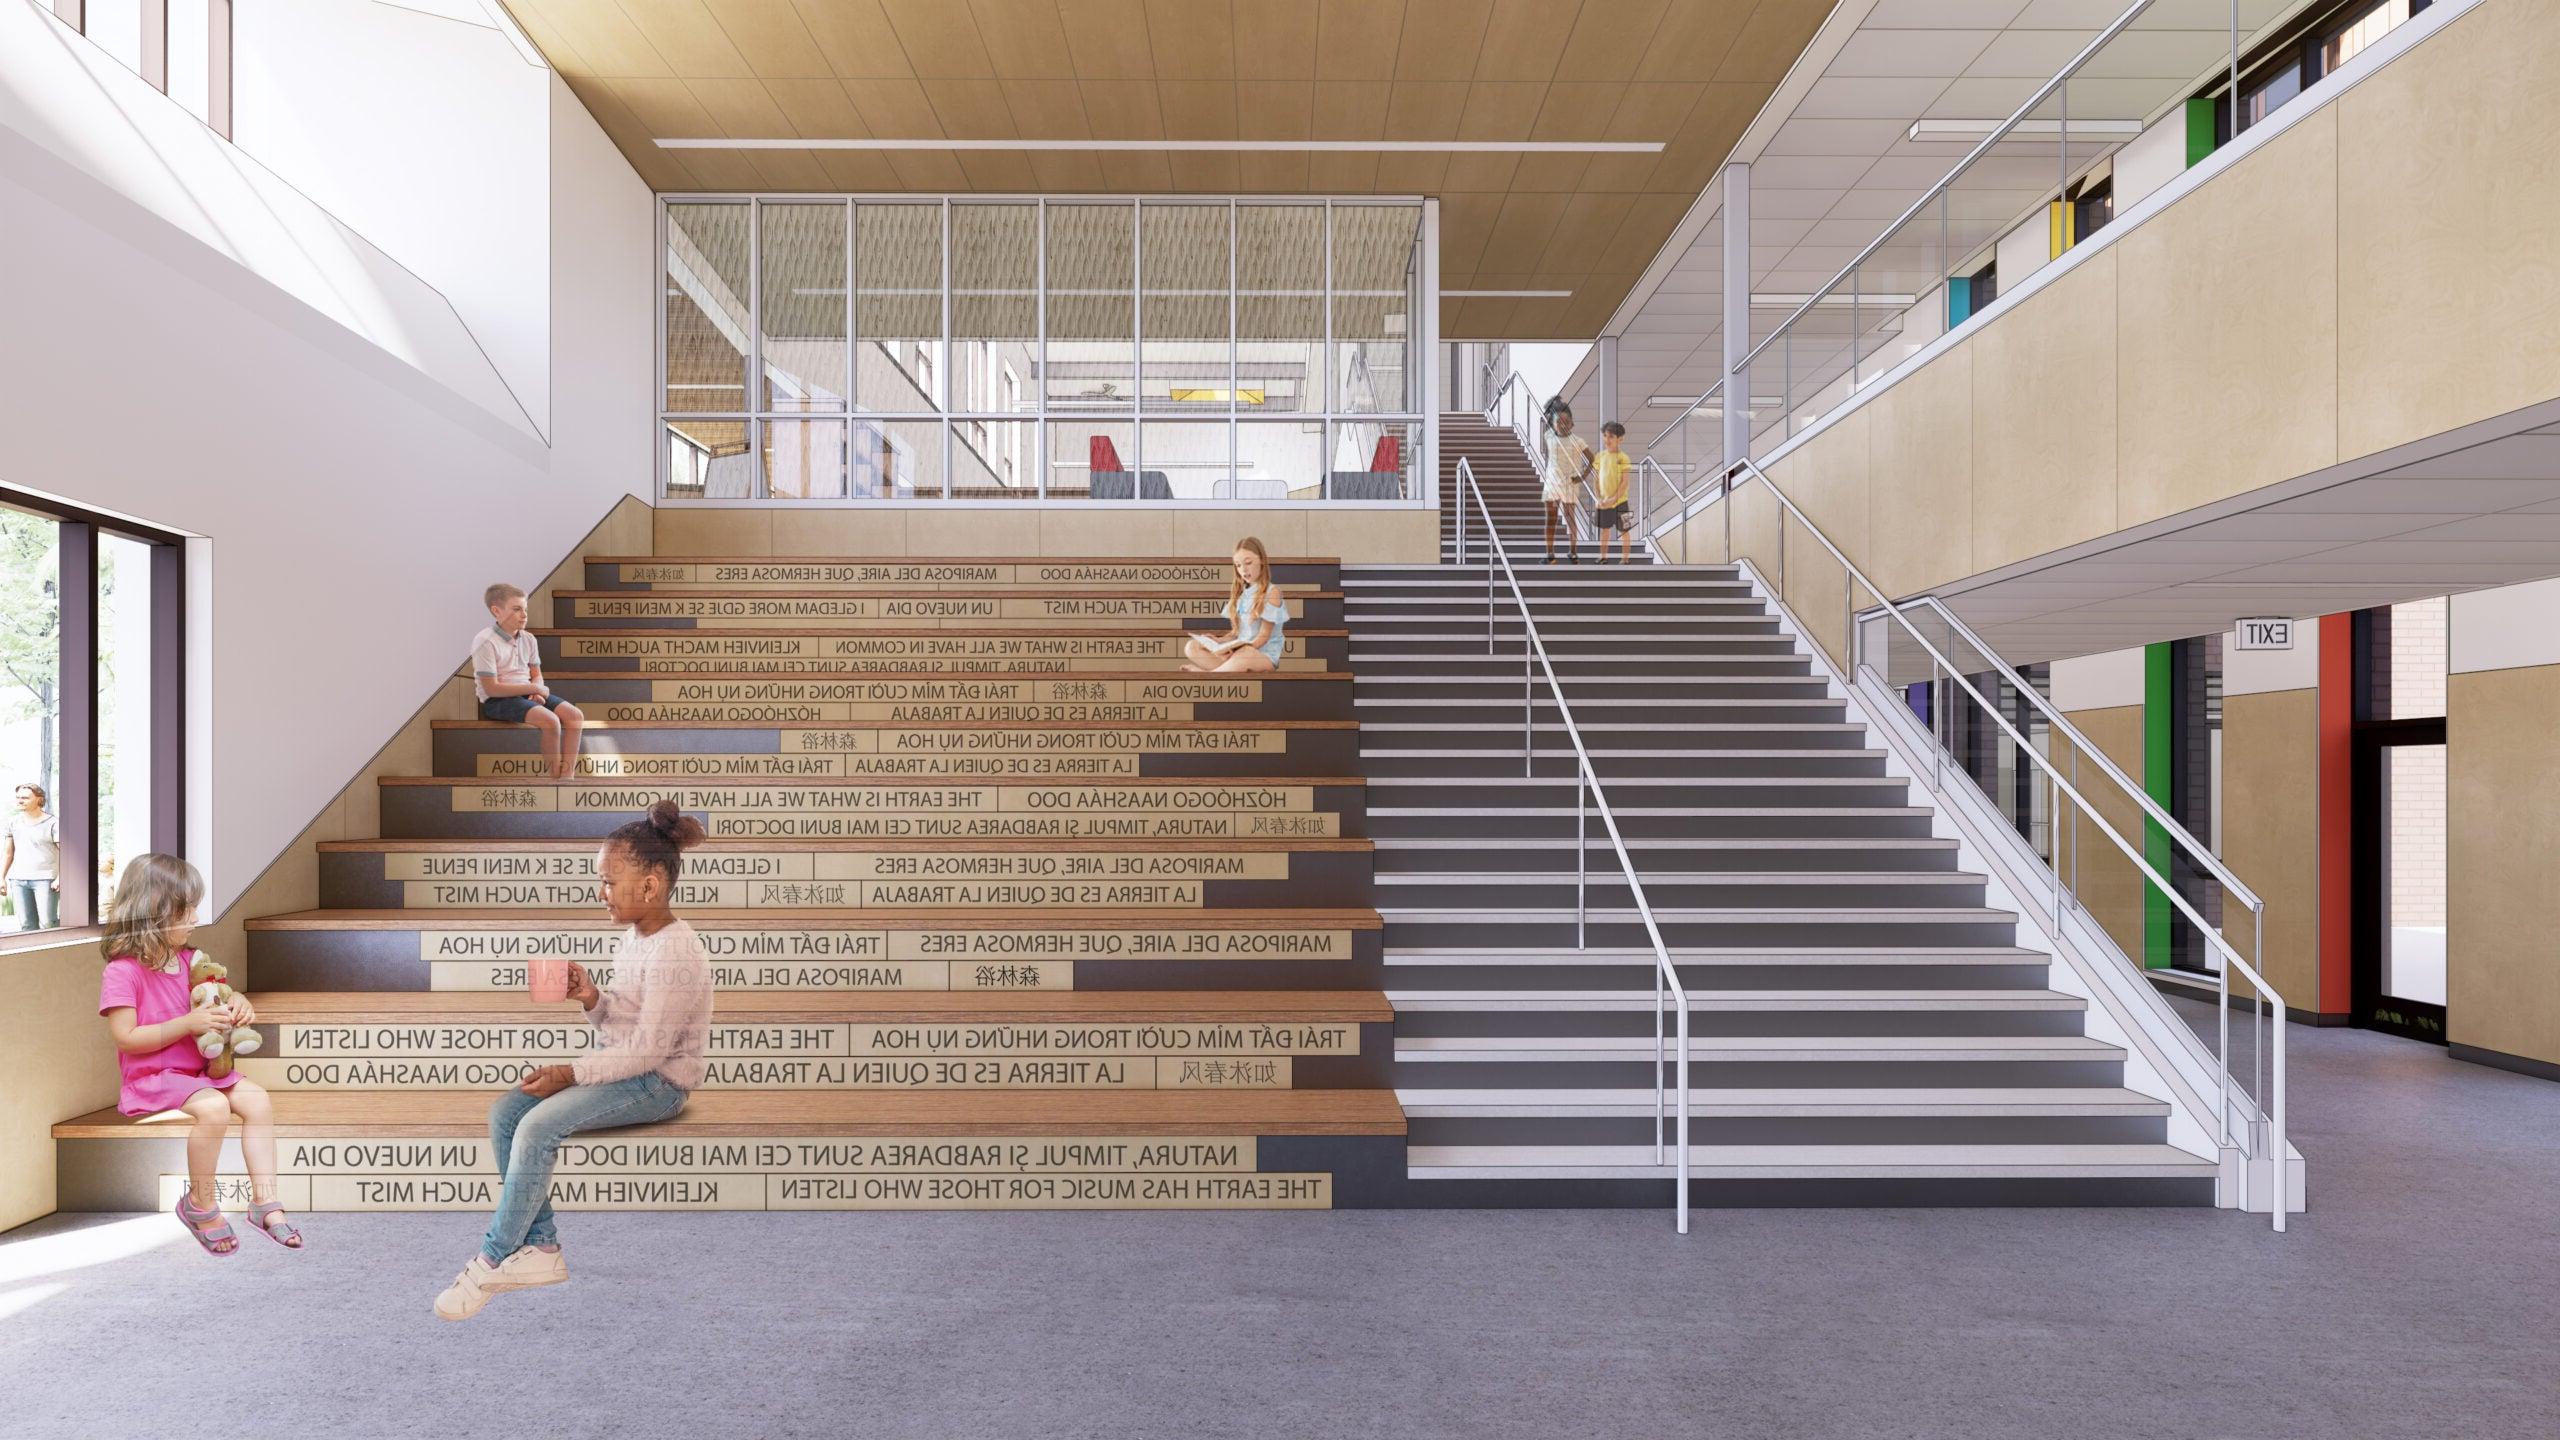 a learning stair with wood large steps for seating and a concrete stair for walking up and down